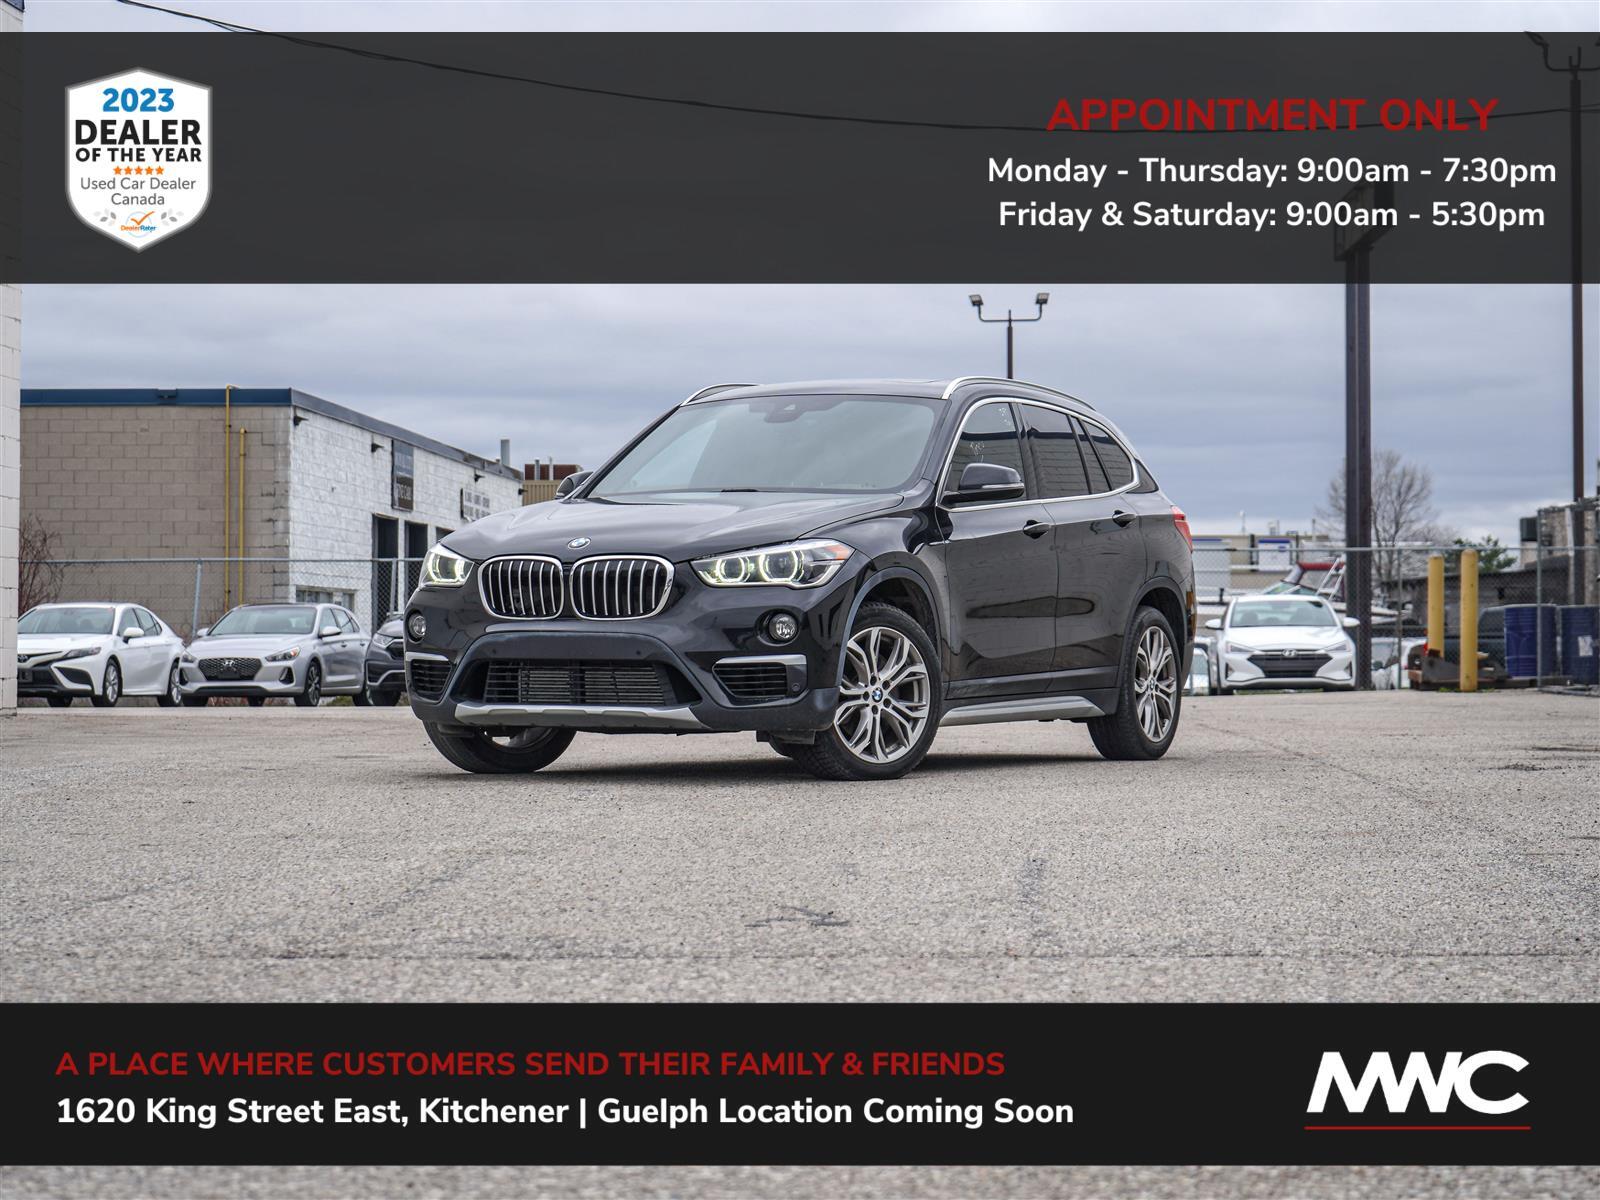 2019 BMW X1 XDRIVE28I | AWD | IN GUELPH, BY APPT. ONLY